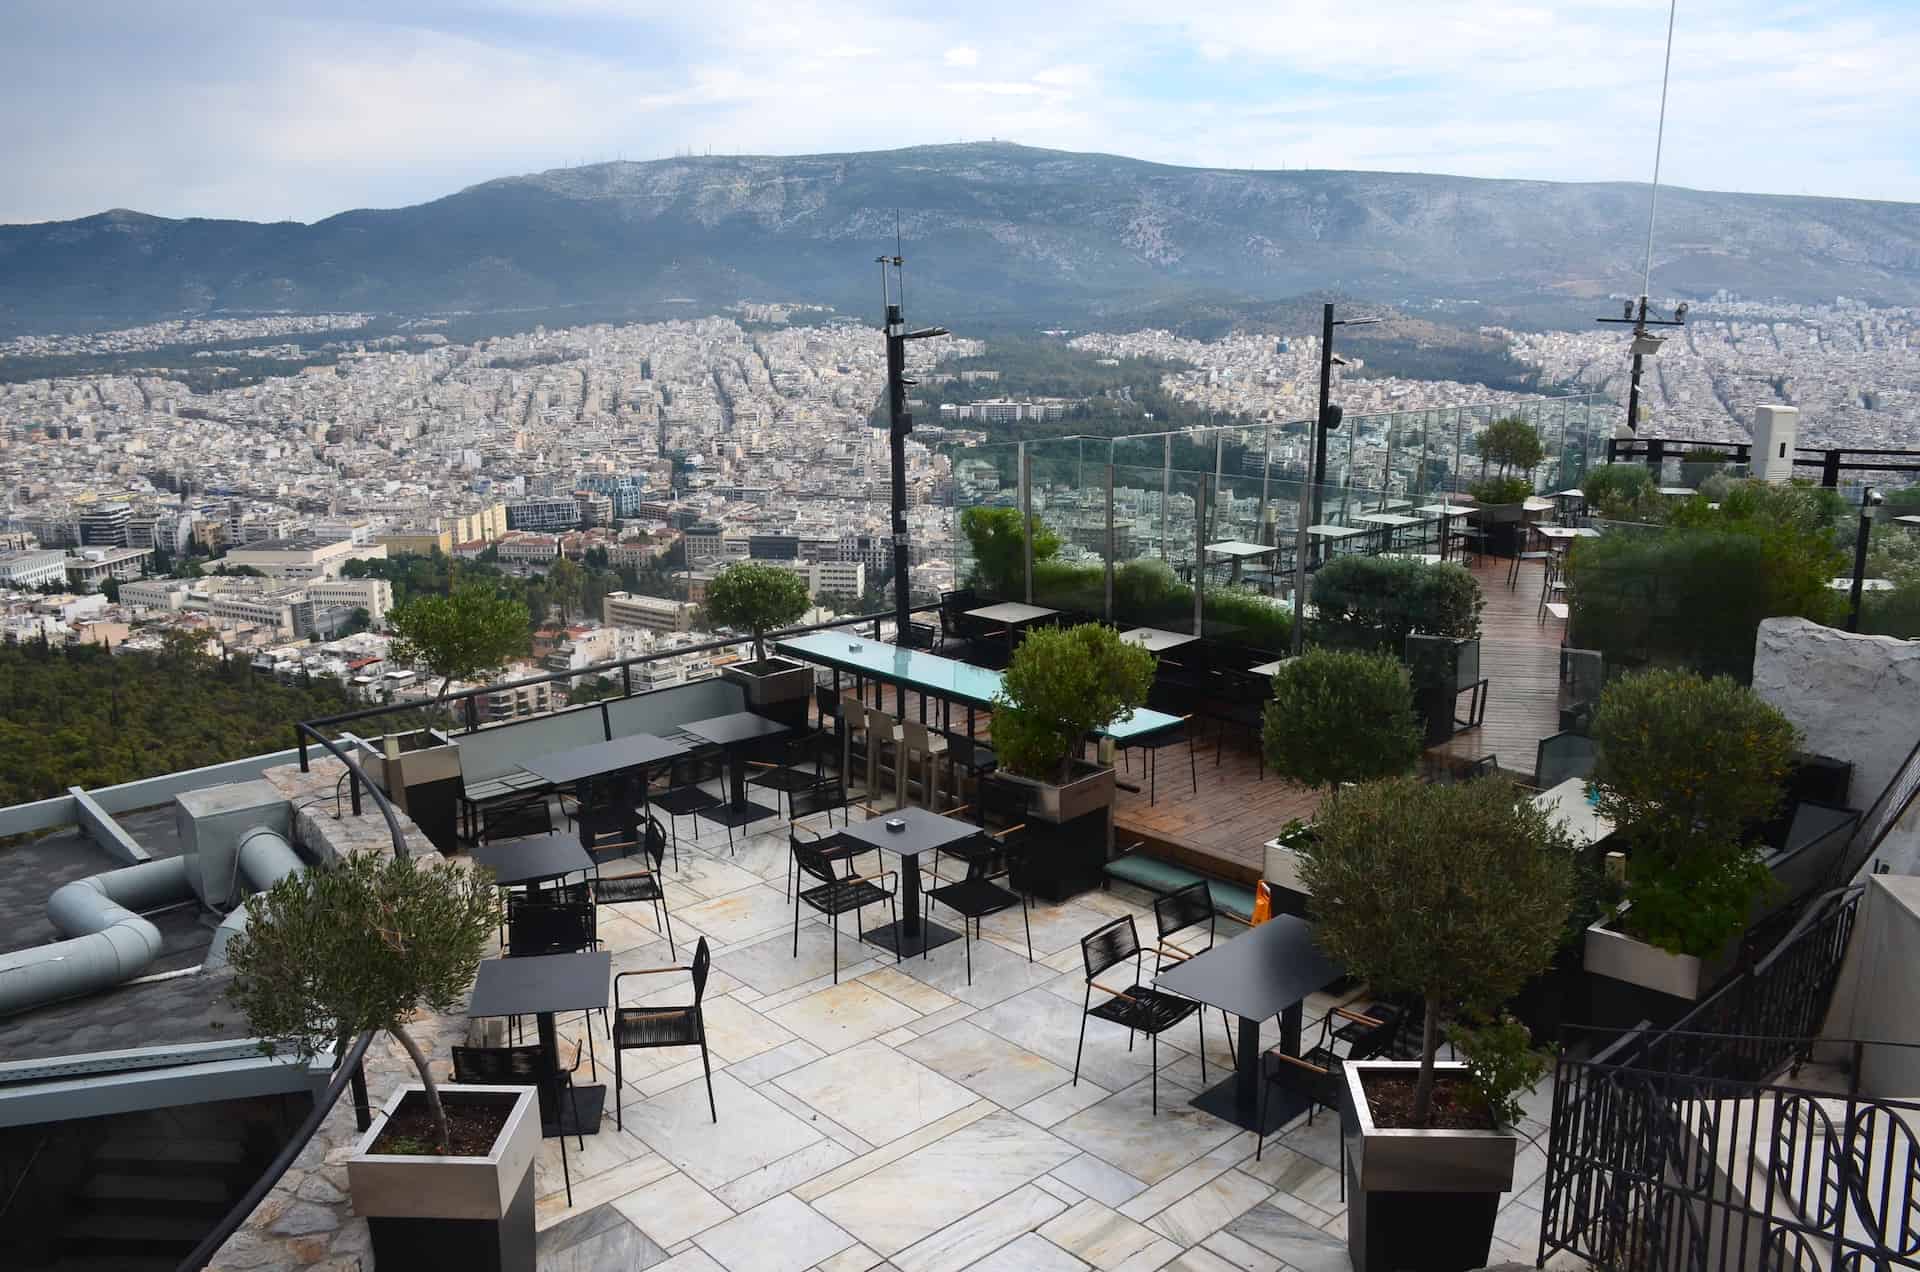 Café Lycabettus at Lycabettus Hill in Athens, Greece